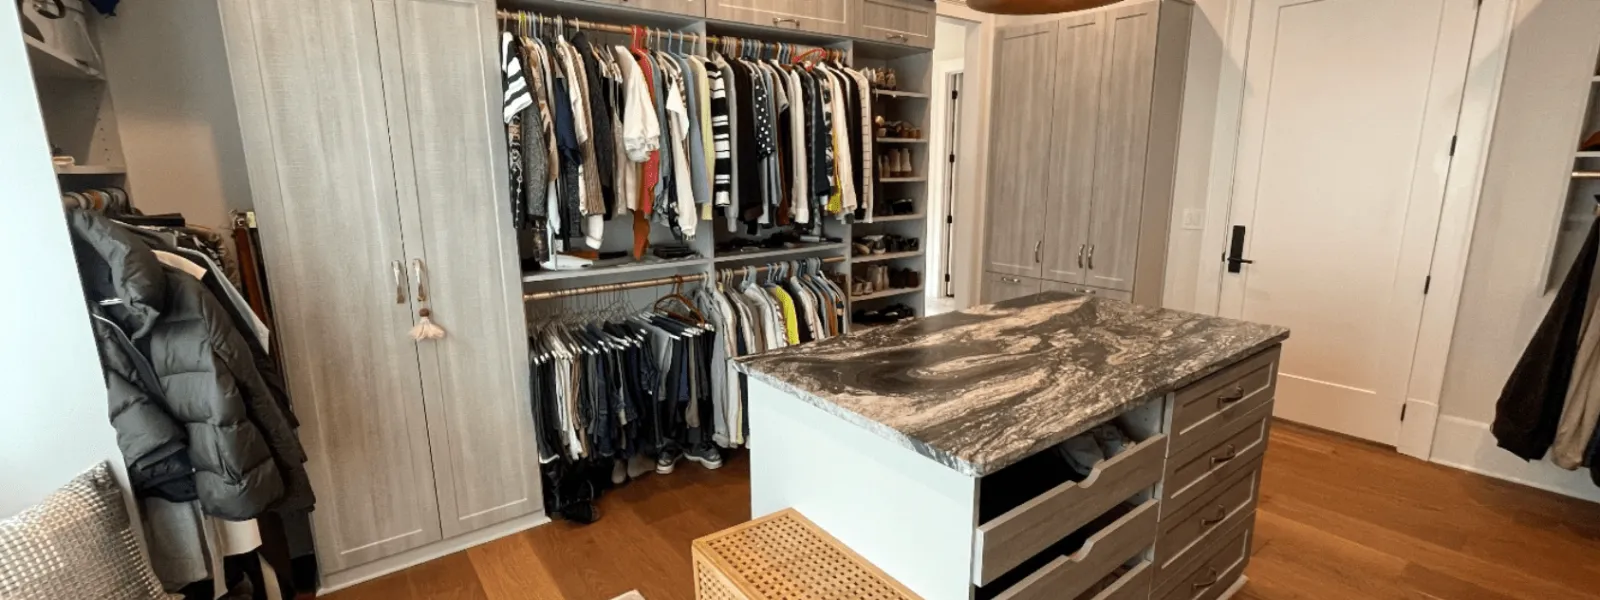 Install custom closet. Minroom with a shelf and a table with clothes on it